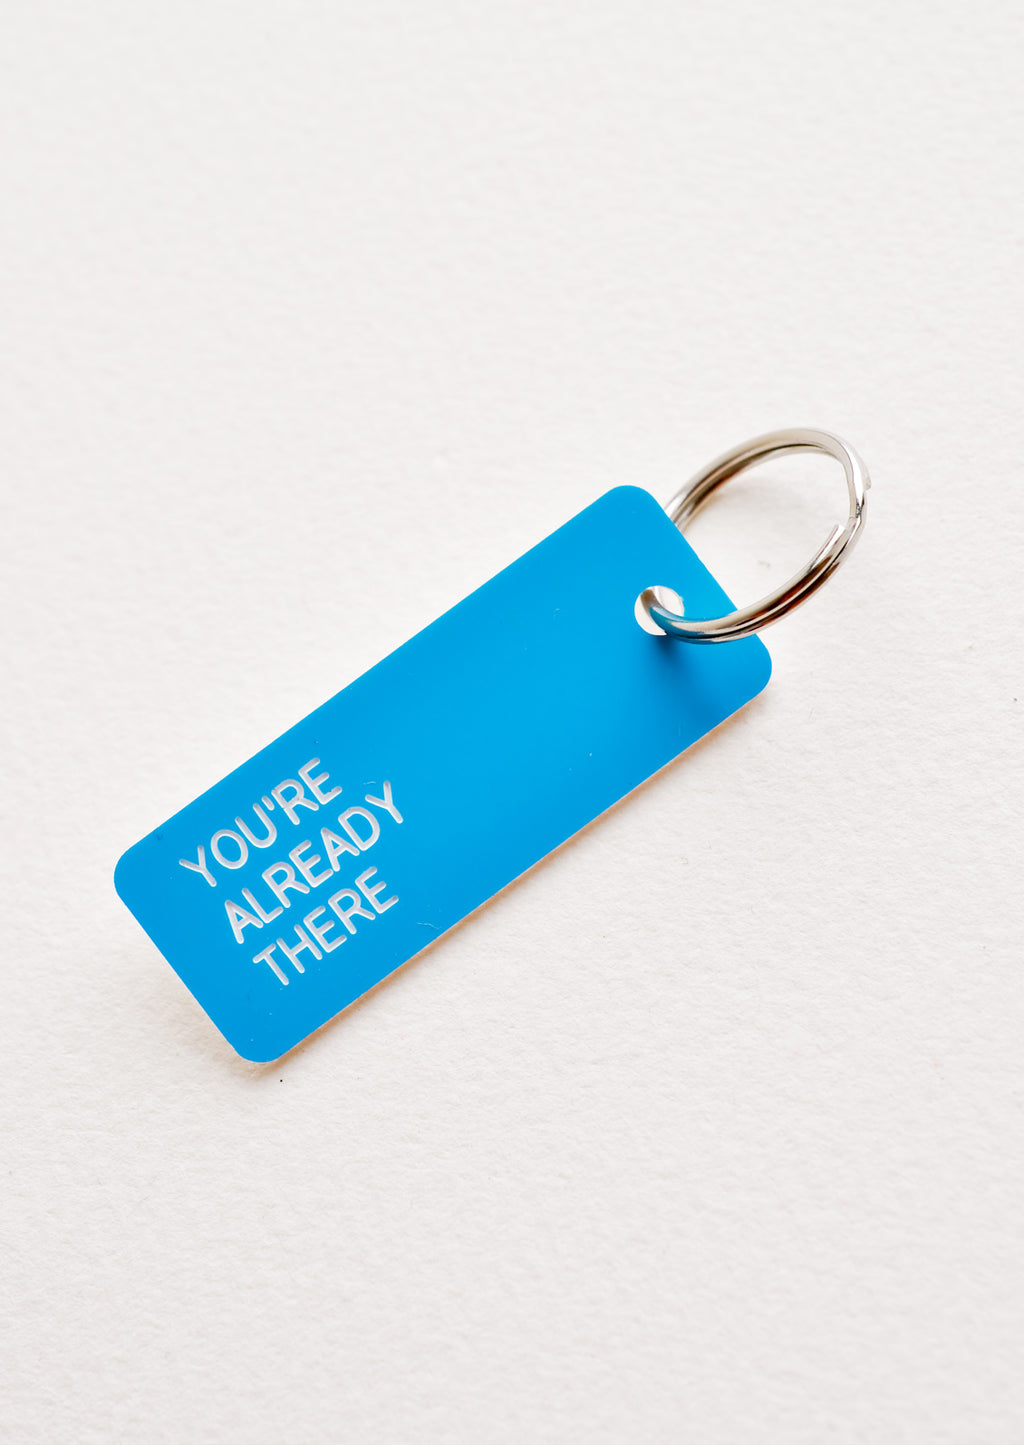 You're Already There: Small acrylic keychain, blue background with white words that says "YOU'RE ALREADY THERE"